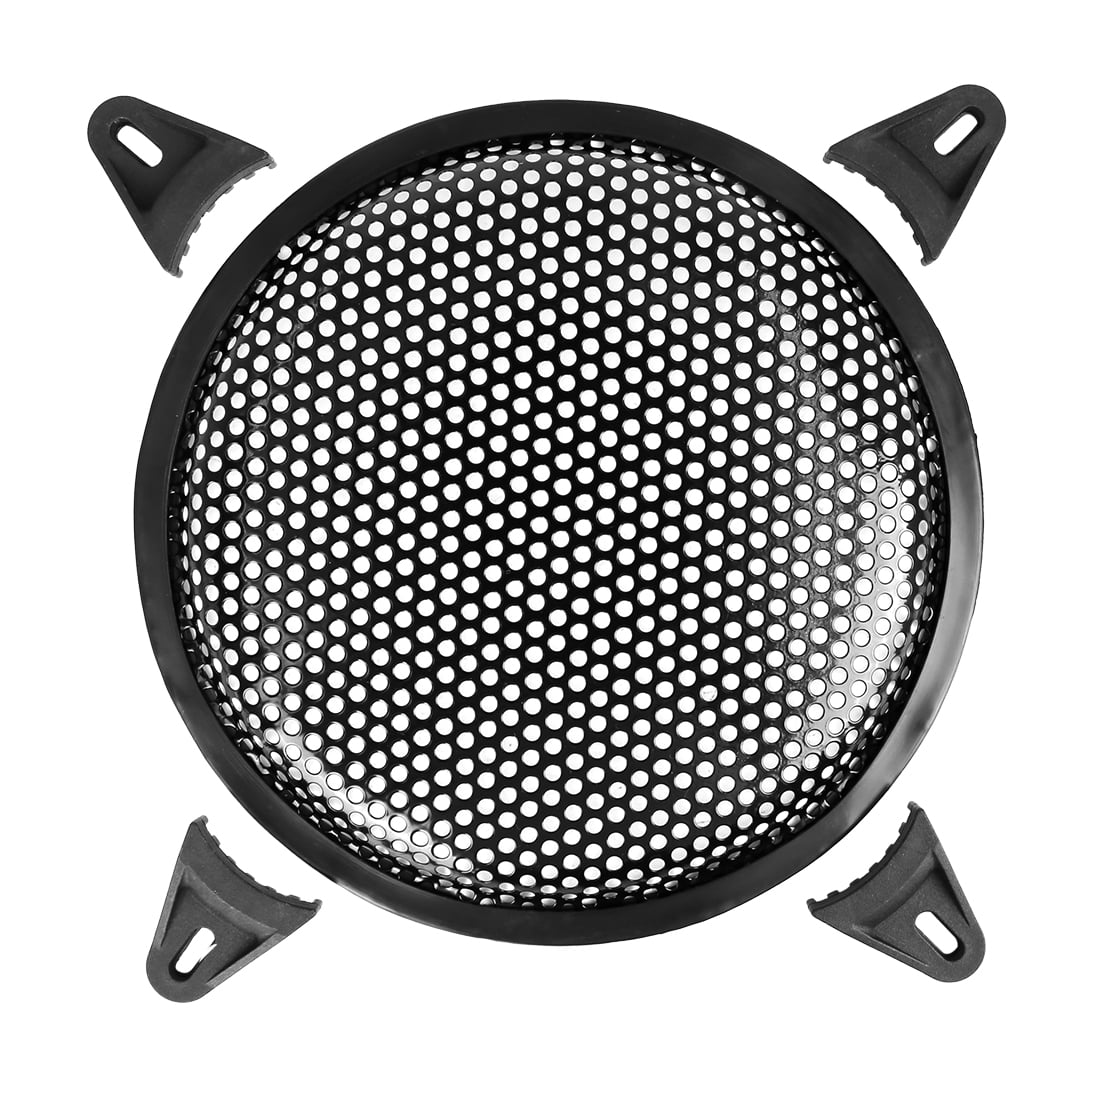 Black Mesh Cover Waffle Speaker Grill Protect Guard Car Audio G